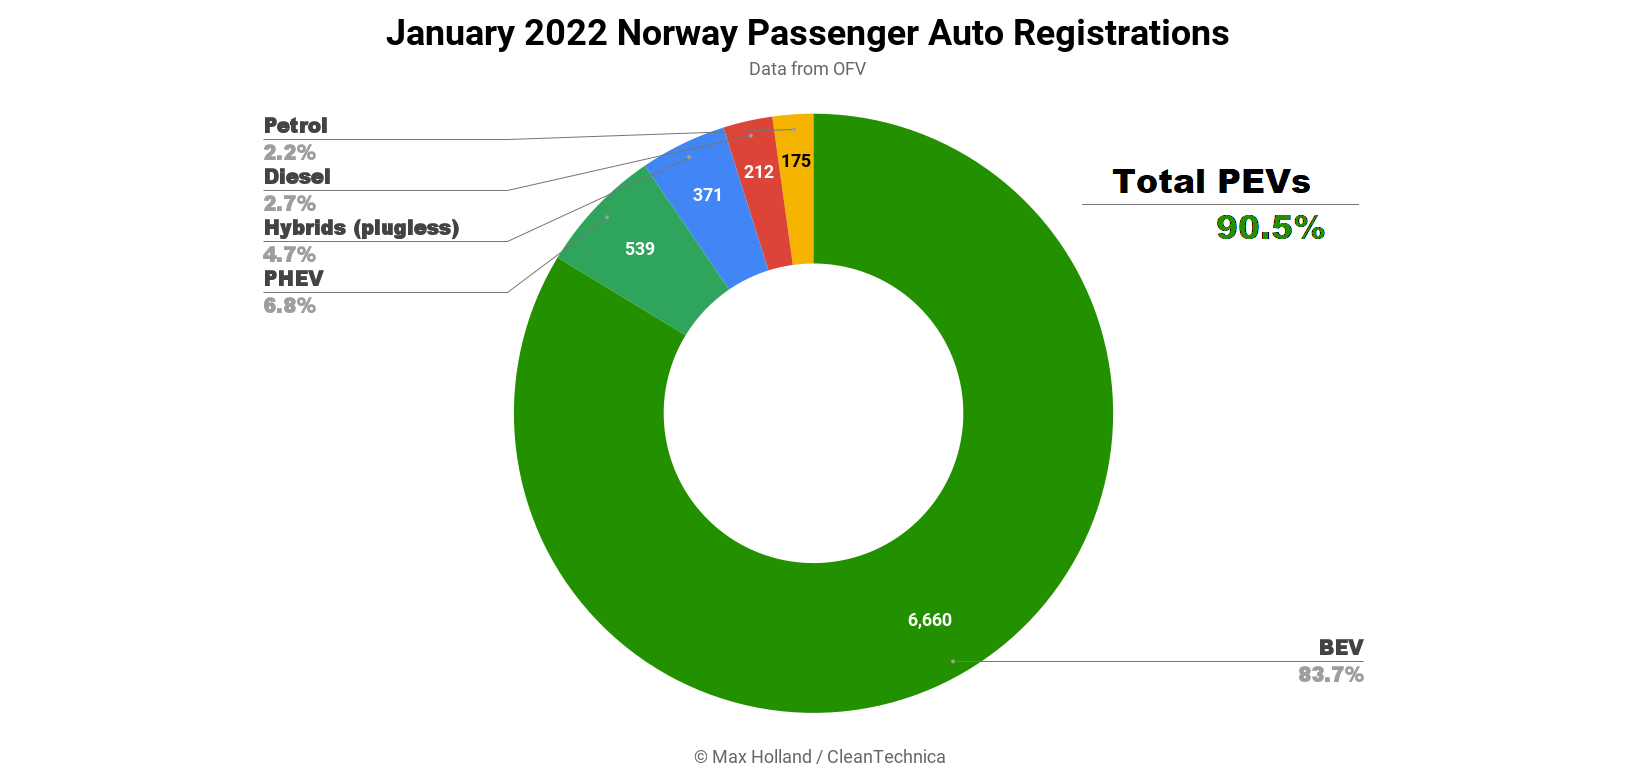 Norway's Plugin EV Share Above 90% Again In January - BEVs At Record 84%